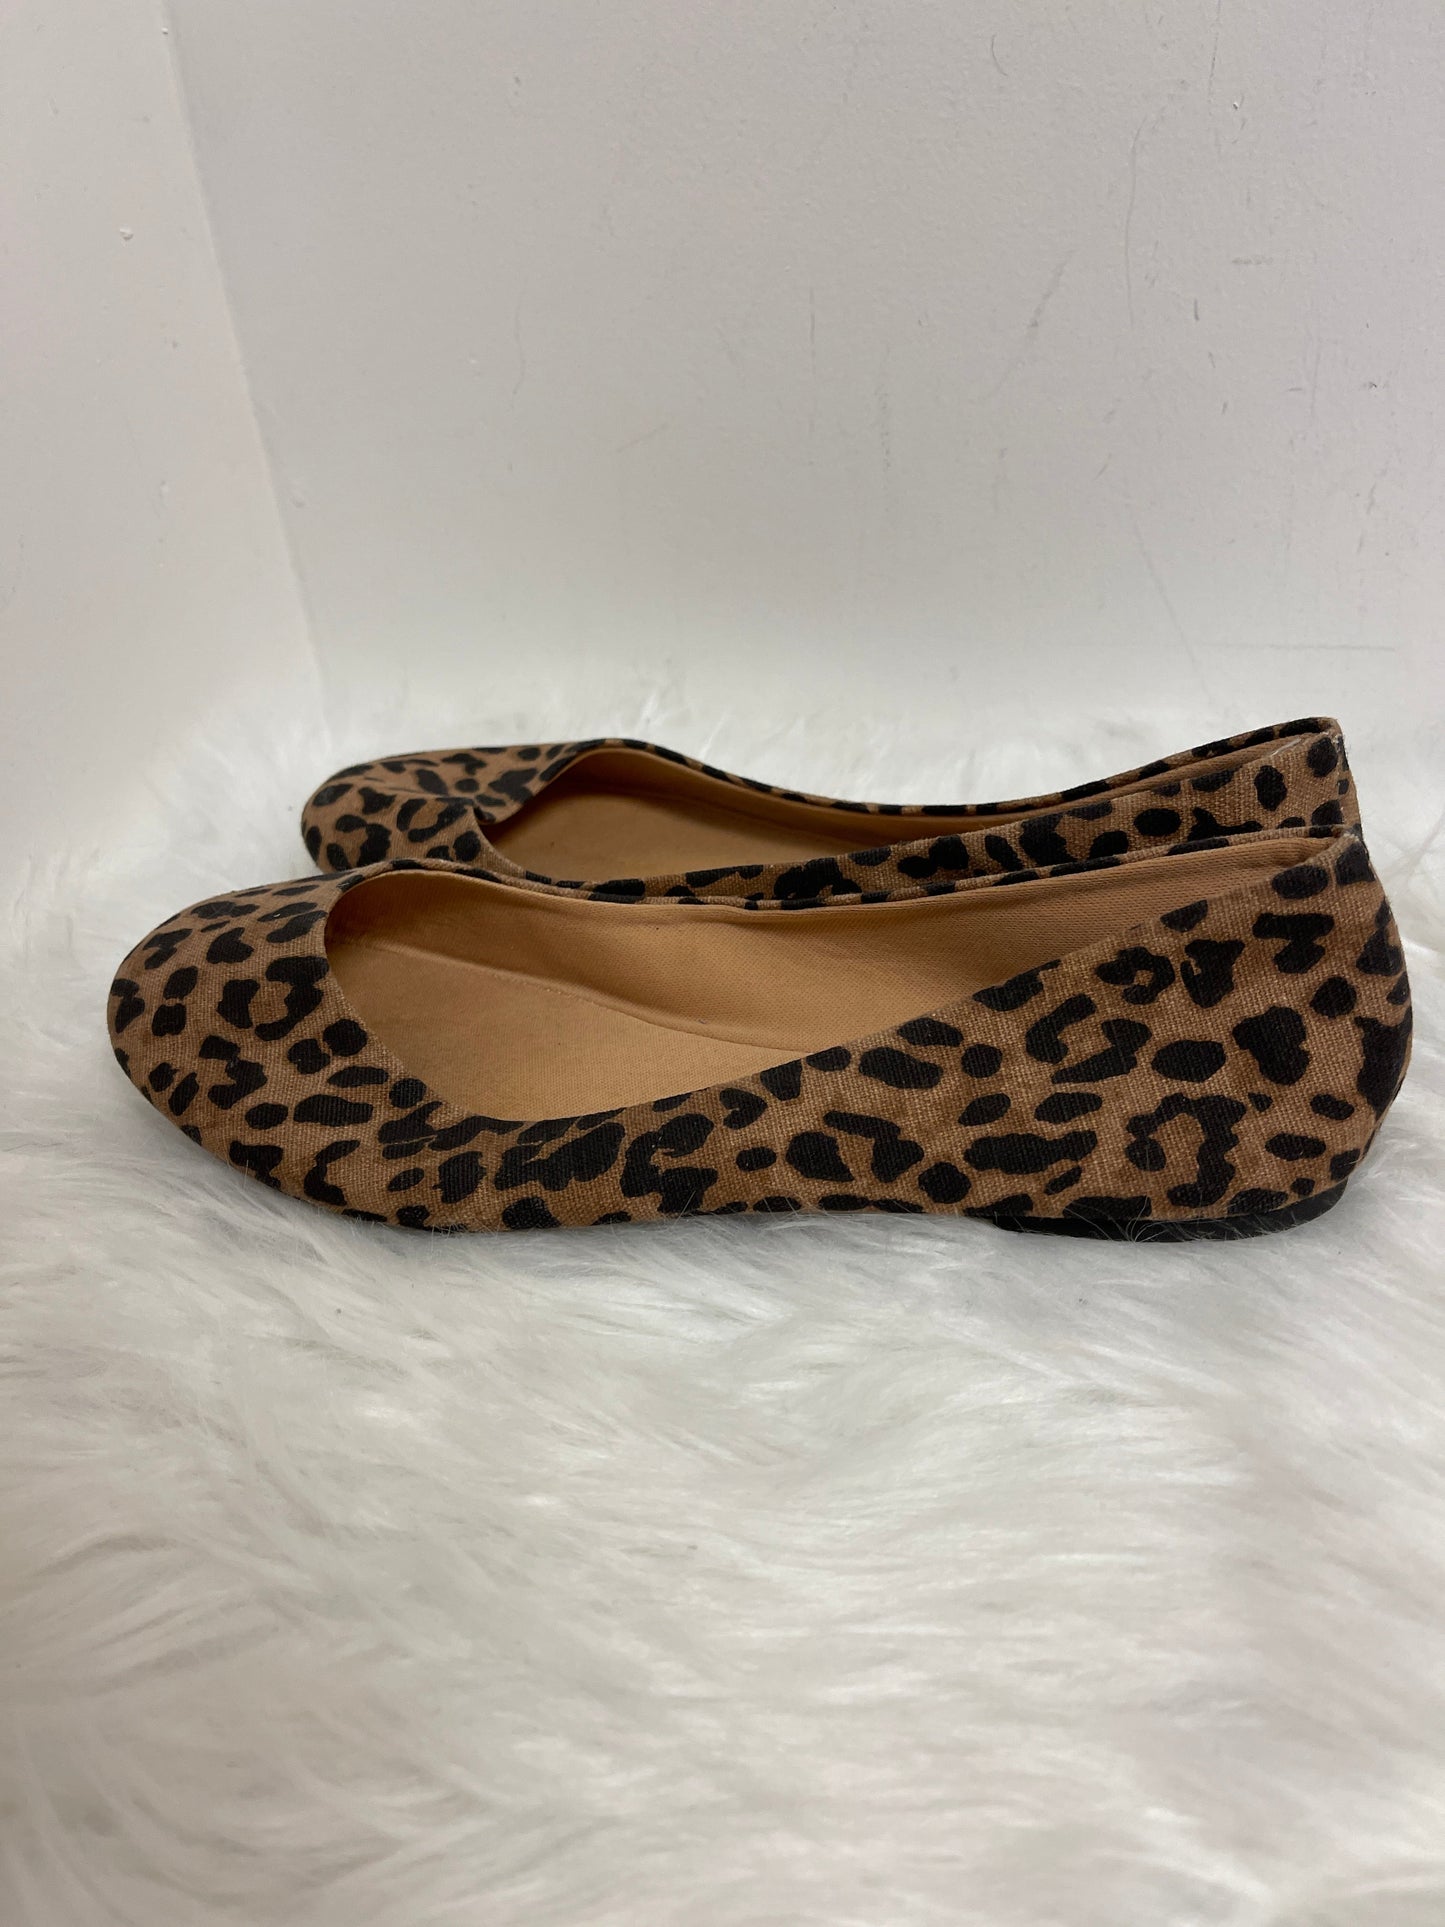 Animal Print Shoes Flats Time And Tru, Size 10